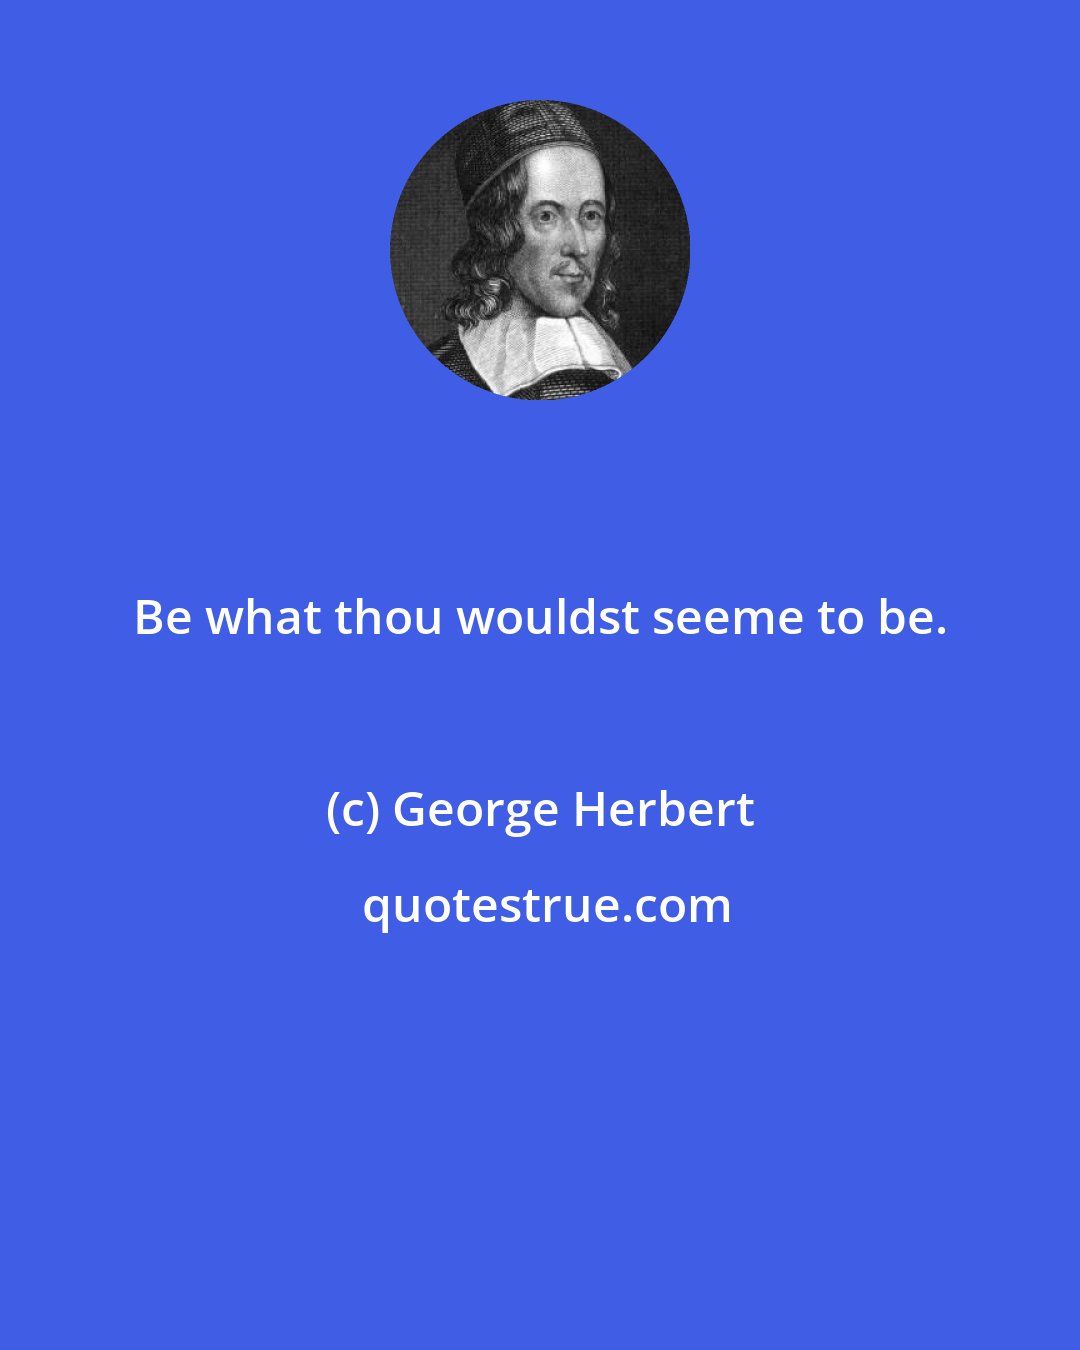 George Herbert: Be what thou wouldst seeme to be.